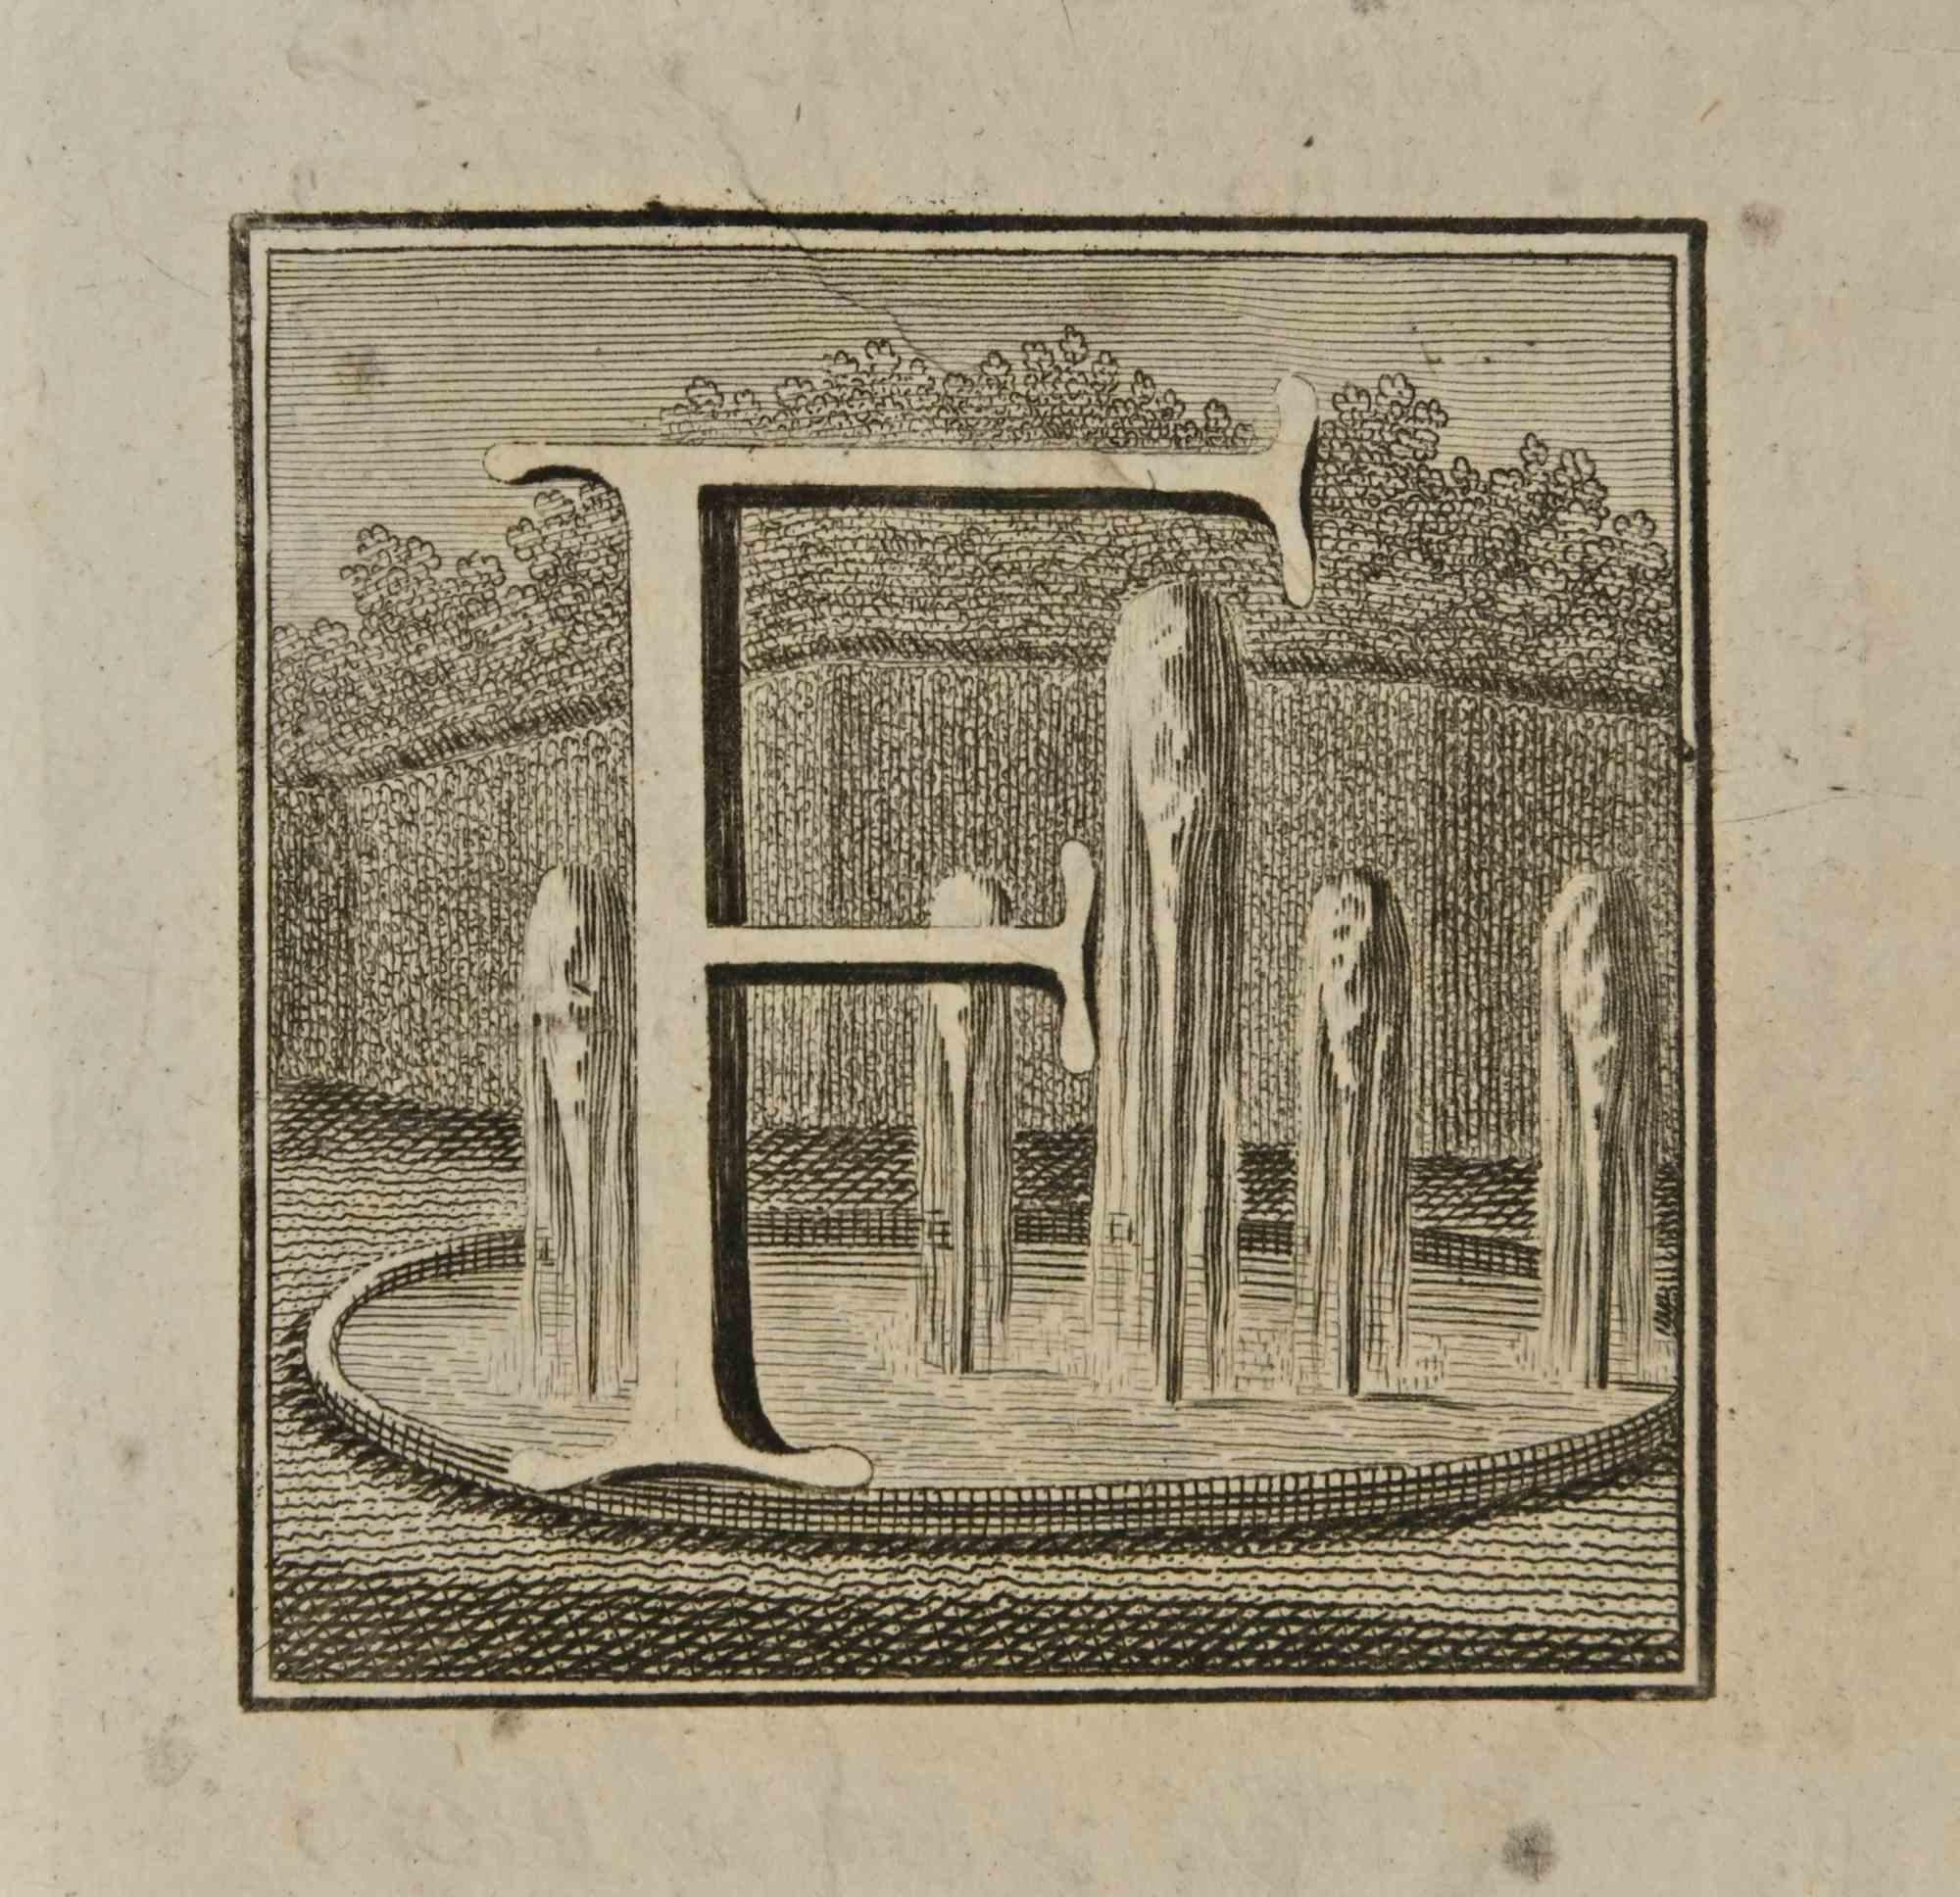 Letter of the Alphabet F,  from the series "Antiquities of Herculaneum", is an etching on paper realized by Luigi Vanvitelli in the 18th century.

Good conditions.

The etching belongs to the print suite “Antiquities of Herculaneum Exposed”